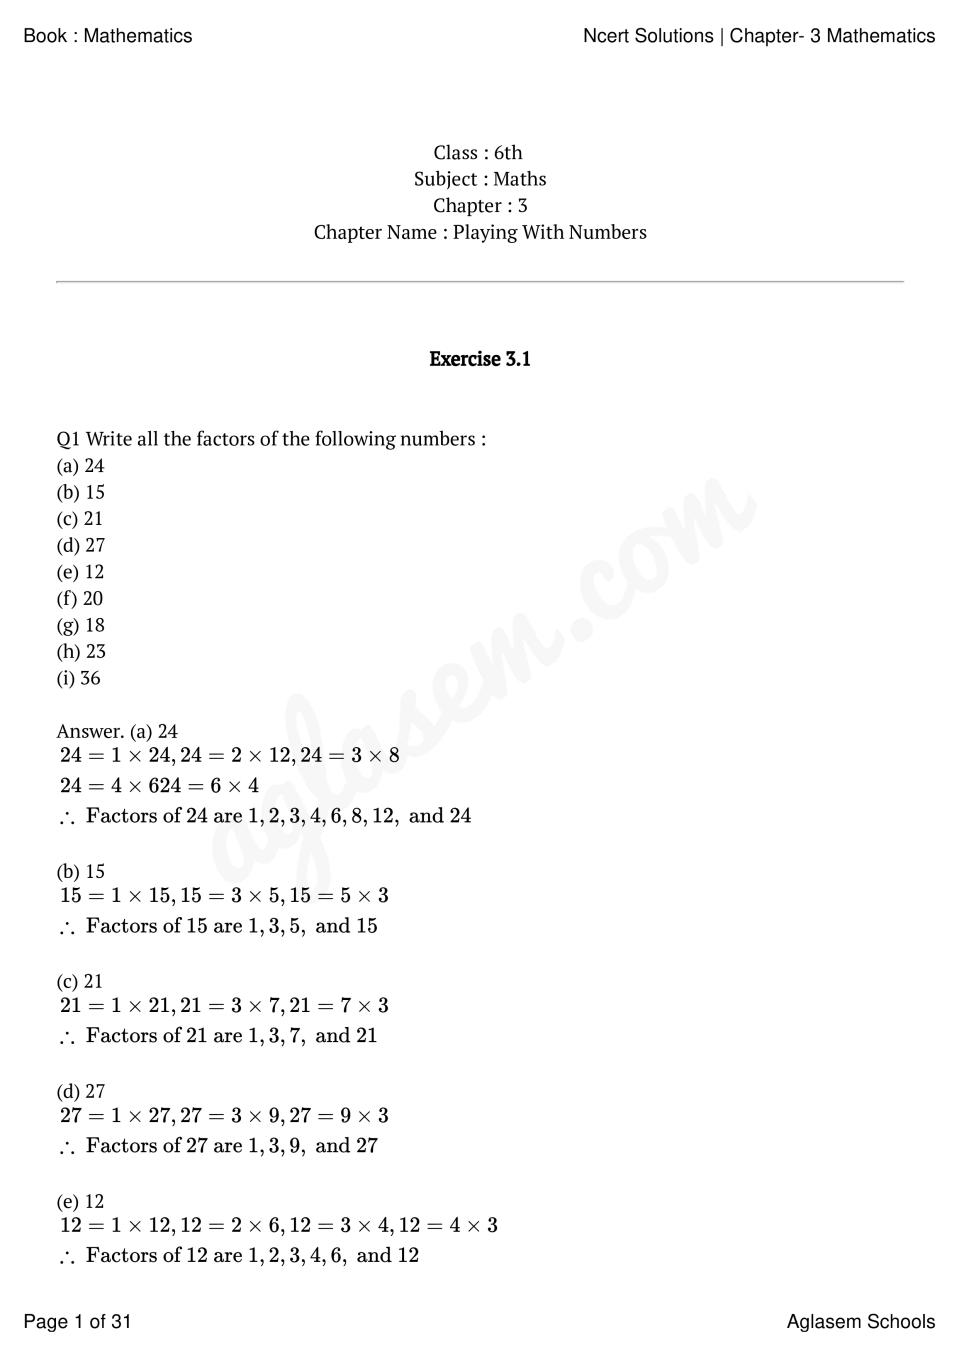 ncert-solutions-for-class-6-maths-chapter-3-playing-with-numbers-pdf